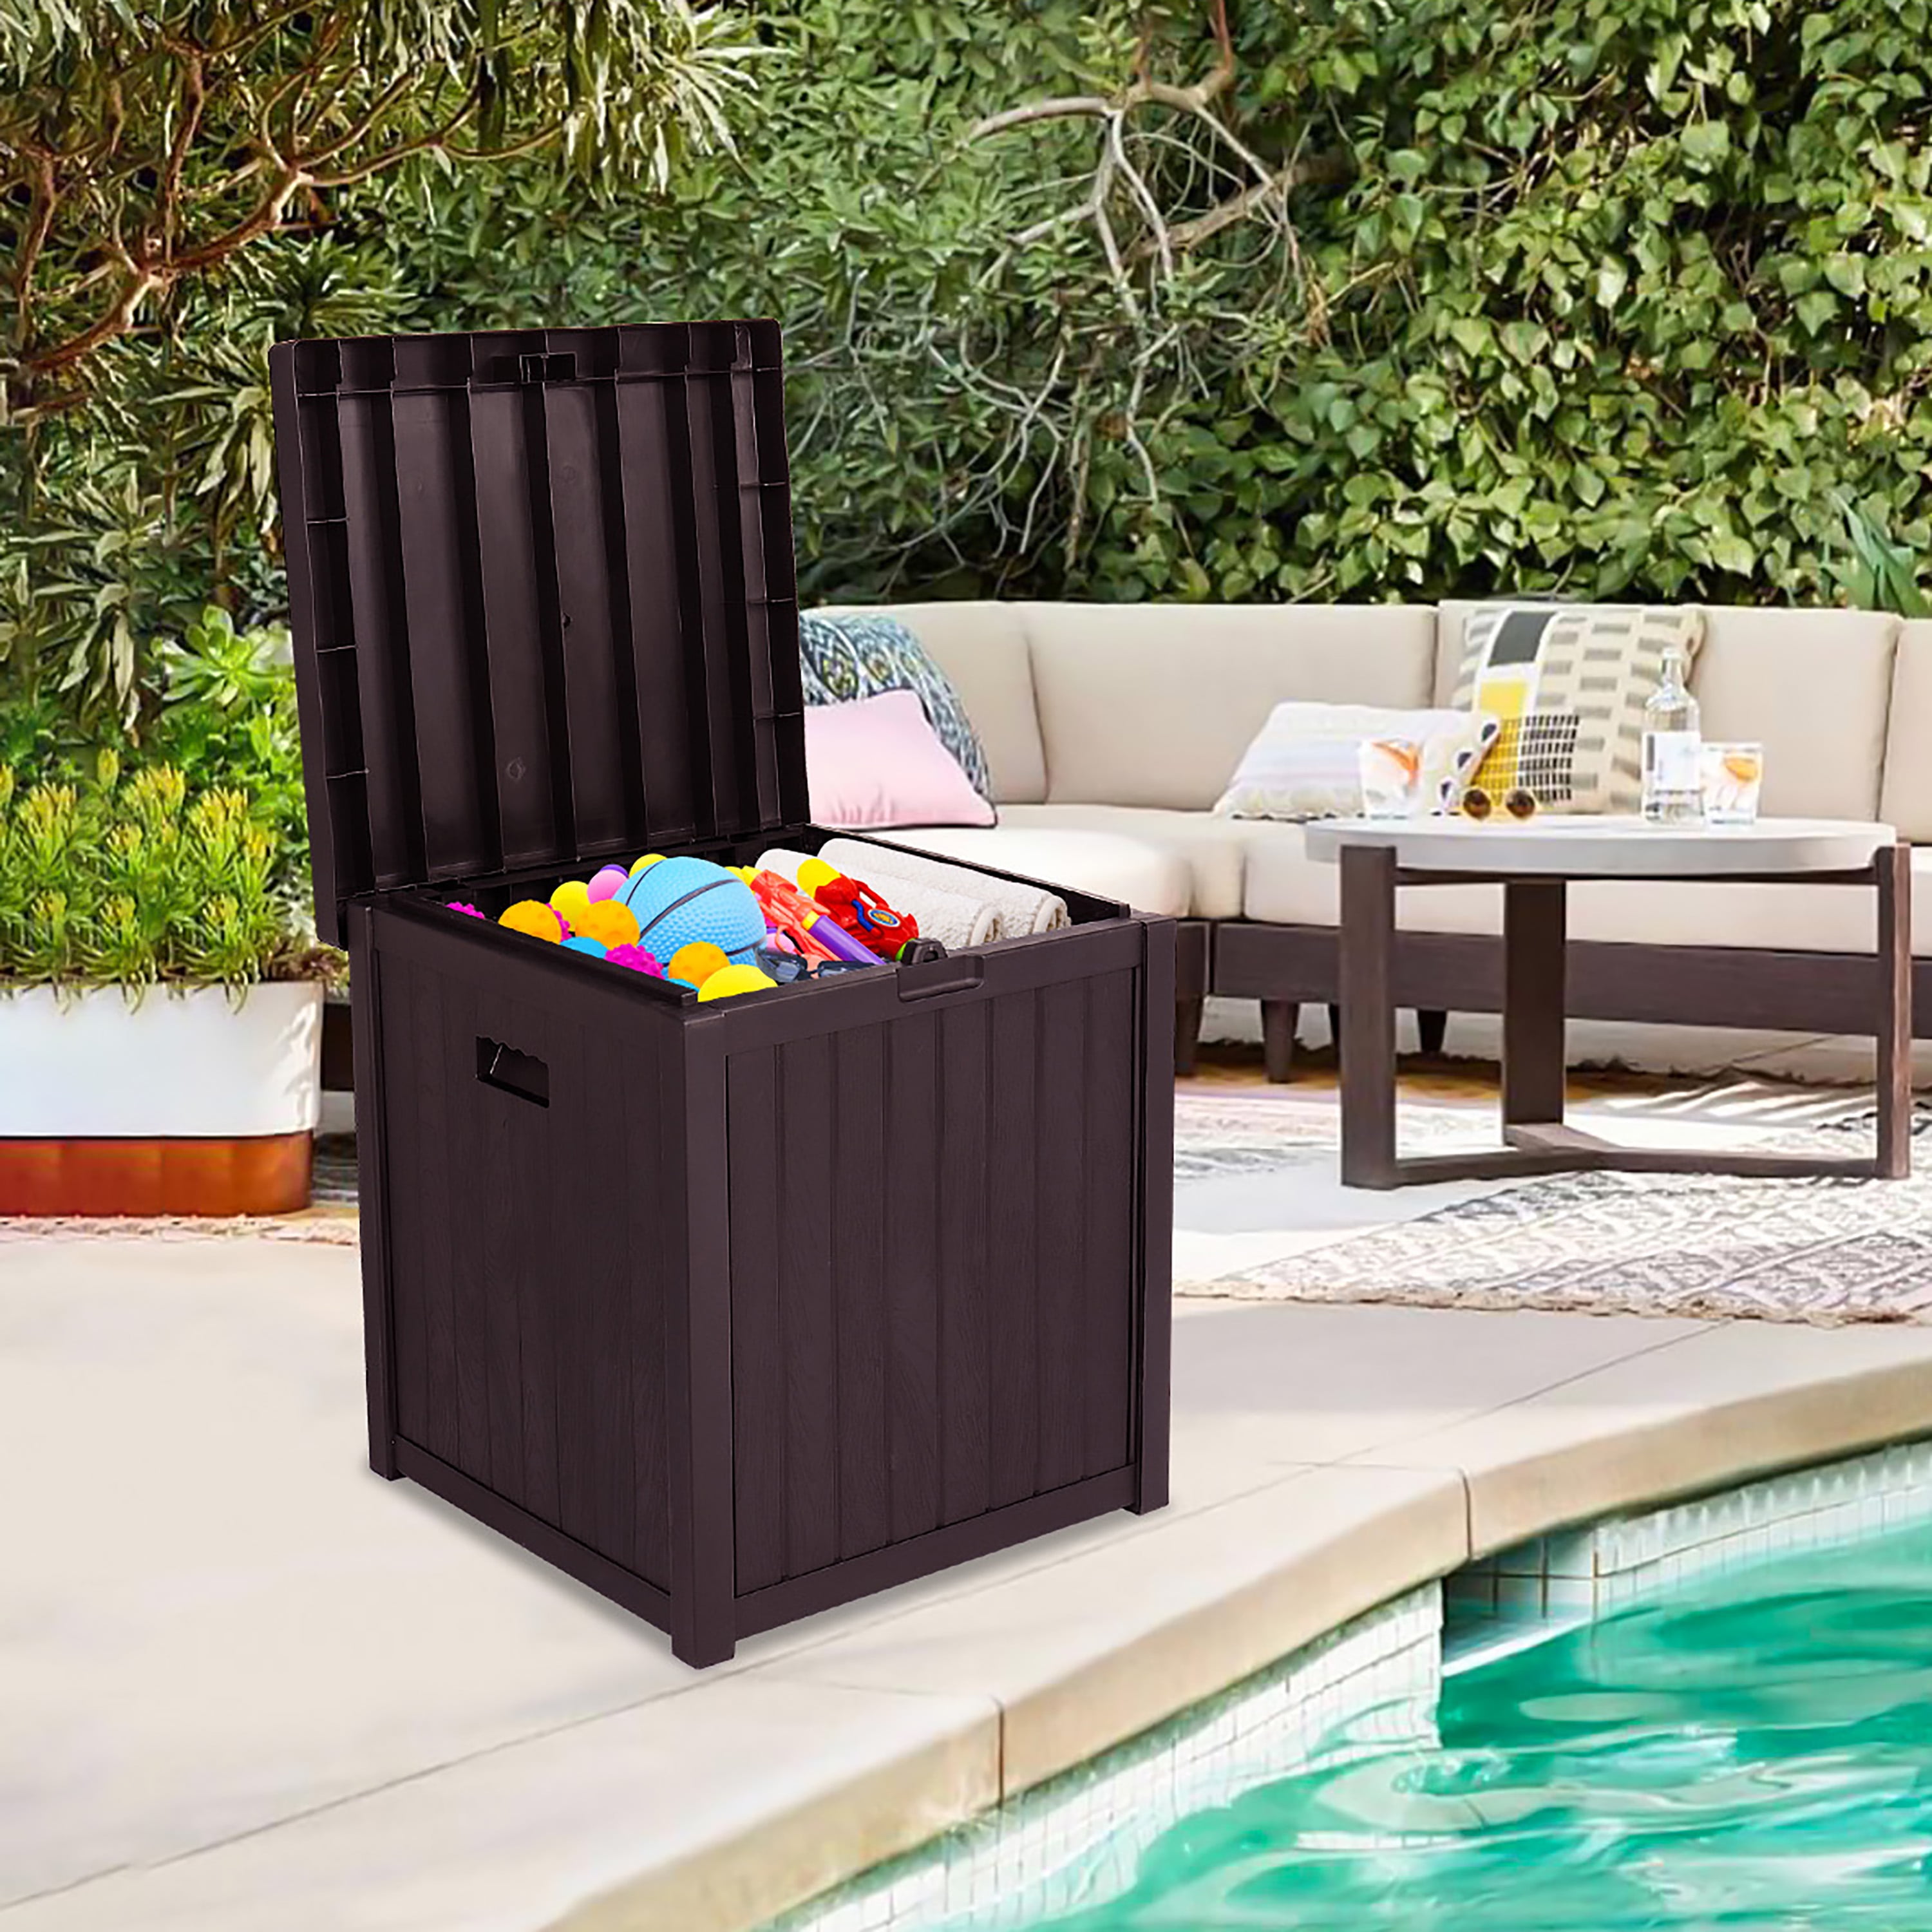 51-Gallon Outdoor Deck Box, Waterproof Storage Container Storage Bins, Deck  Box with Seat for Patio Cushions Garden Tools Pool Toys, Outdoor Storage  Box with Lockable Lid for Patio, Garage, Yard 